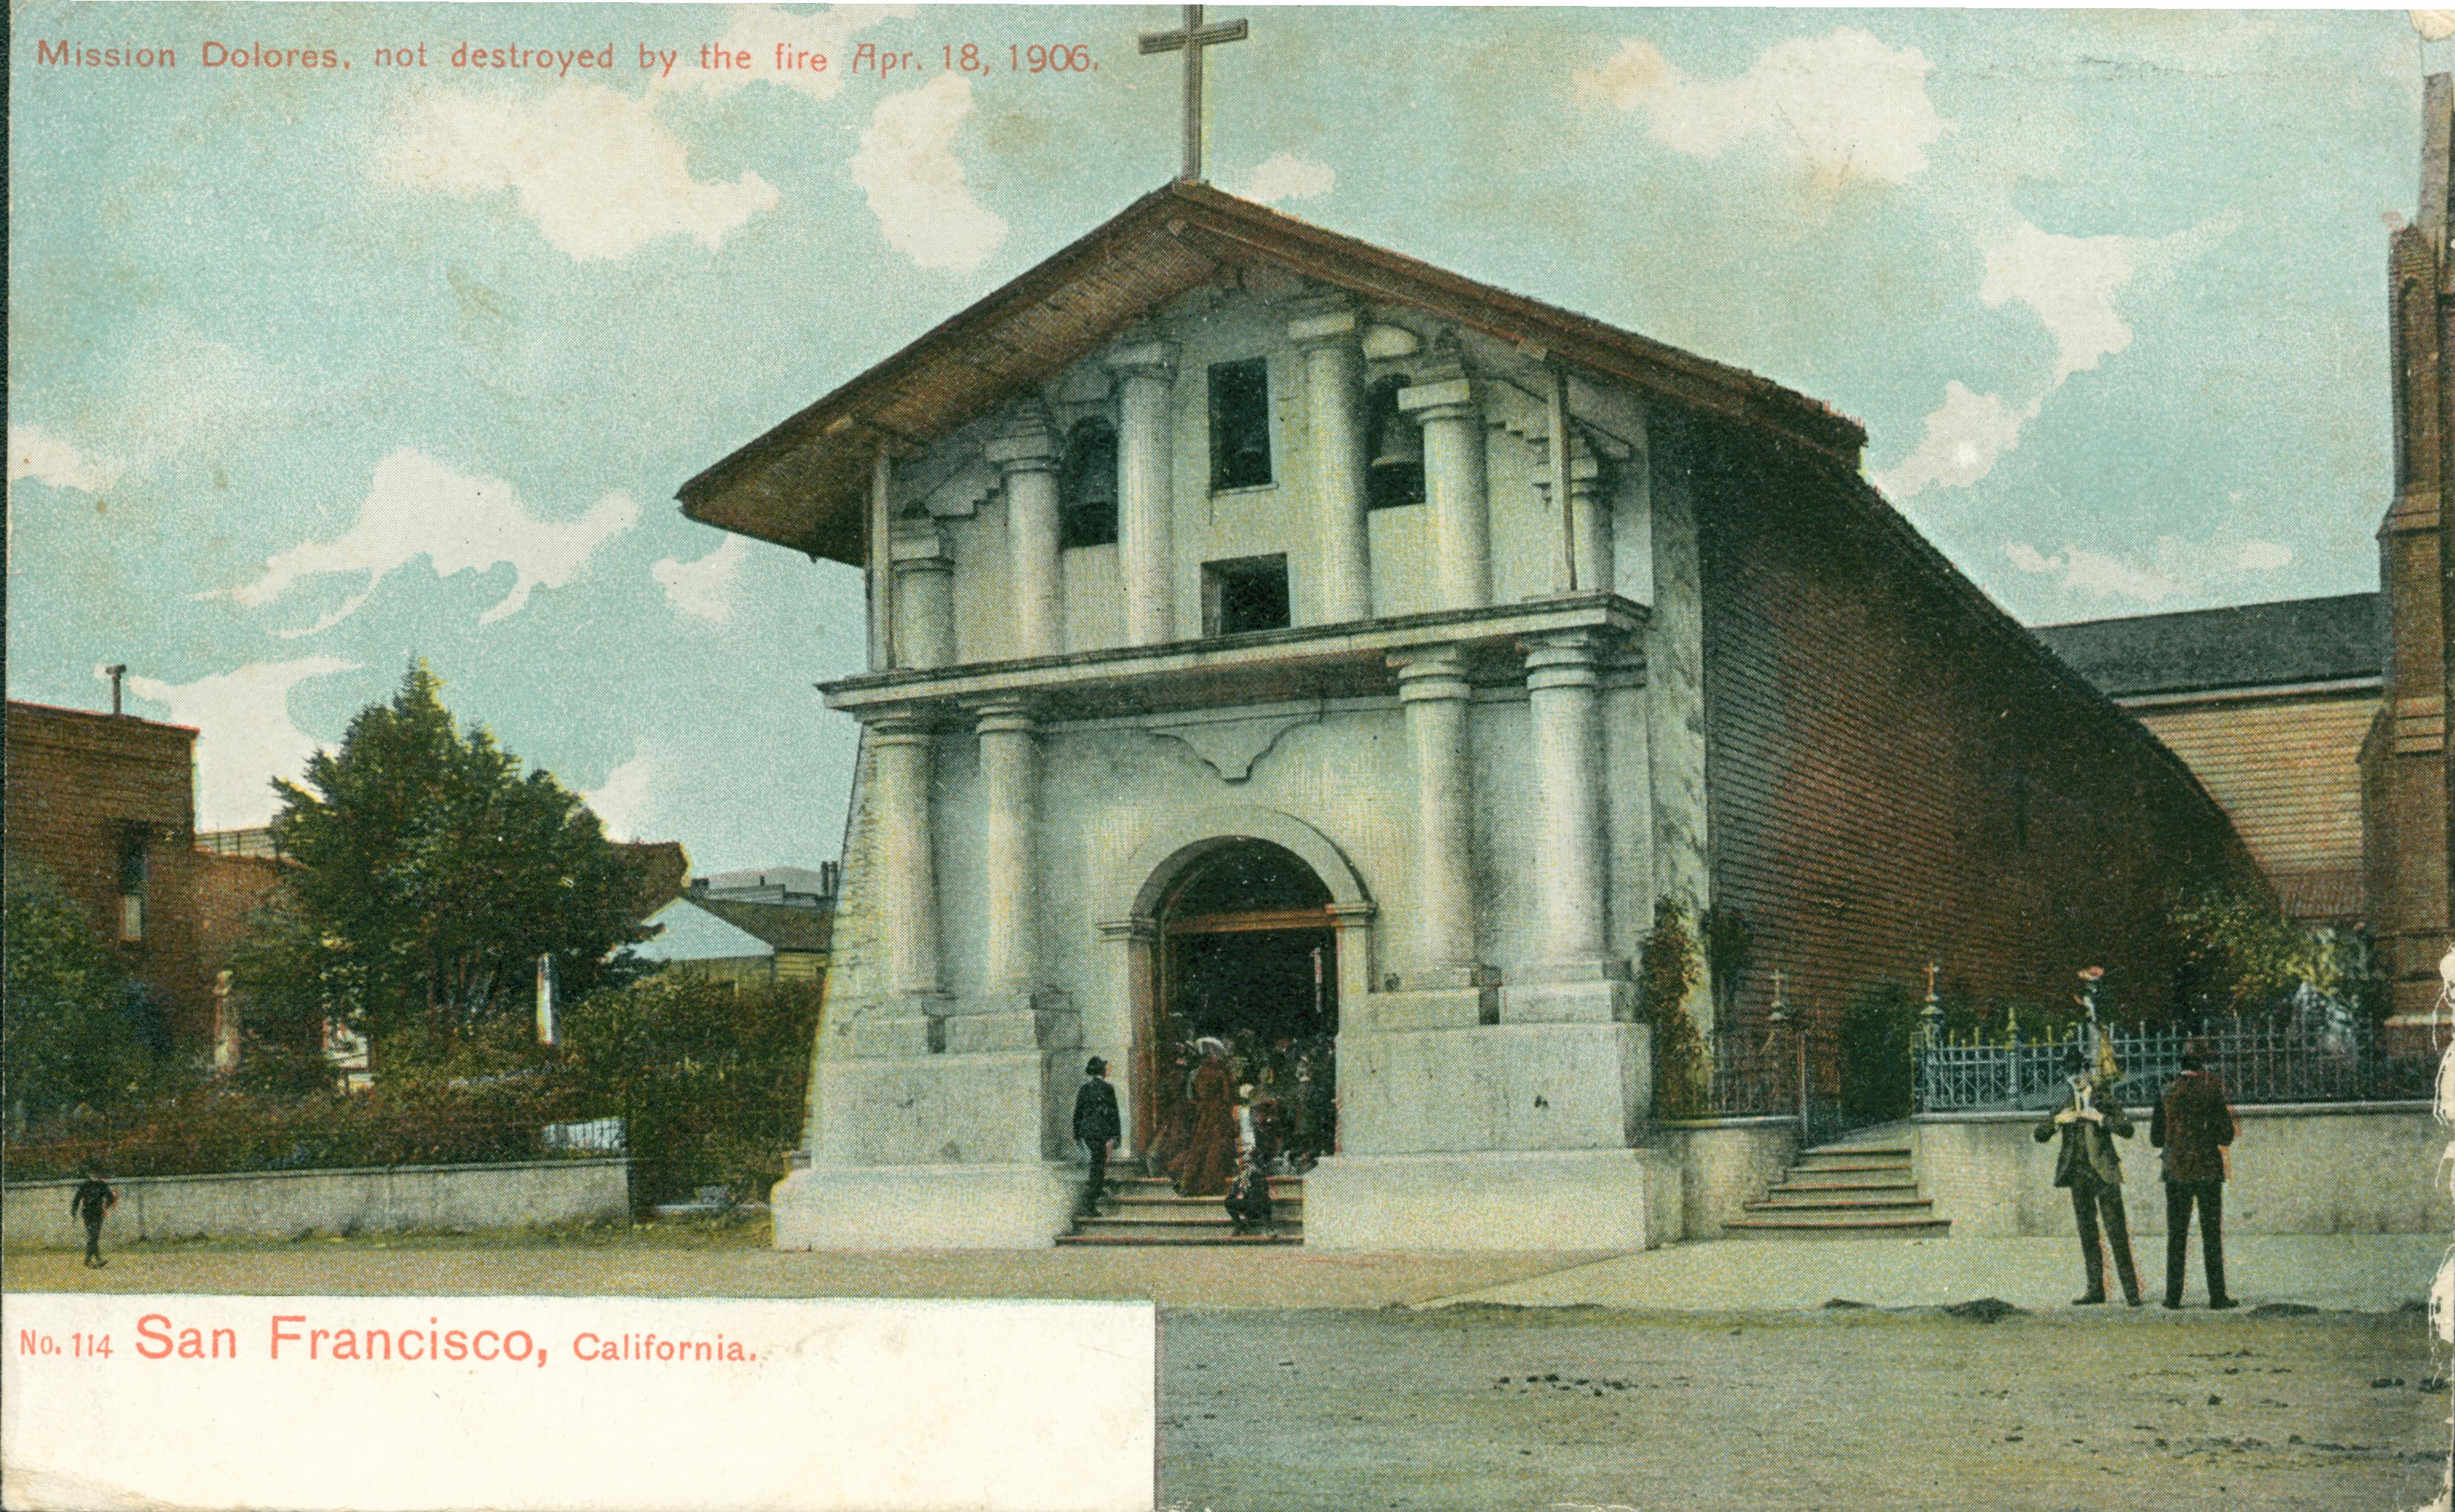 Drawing of the Mission Dolores after the fire April 18, 1906.